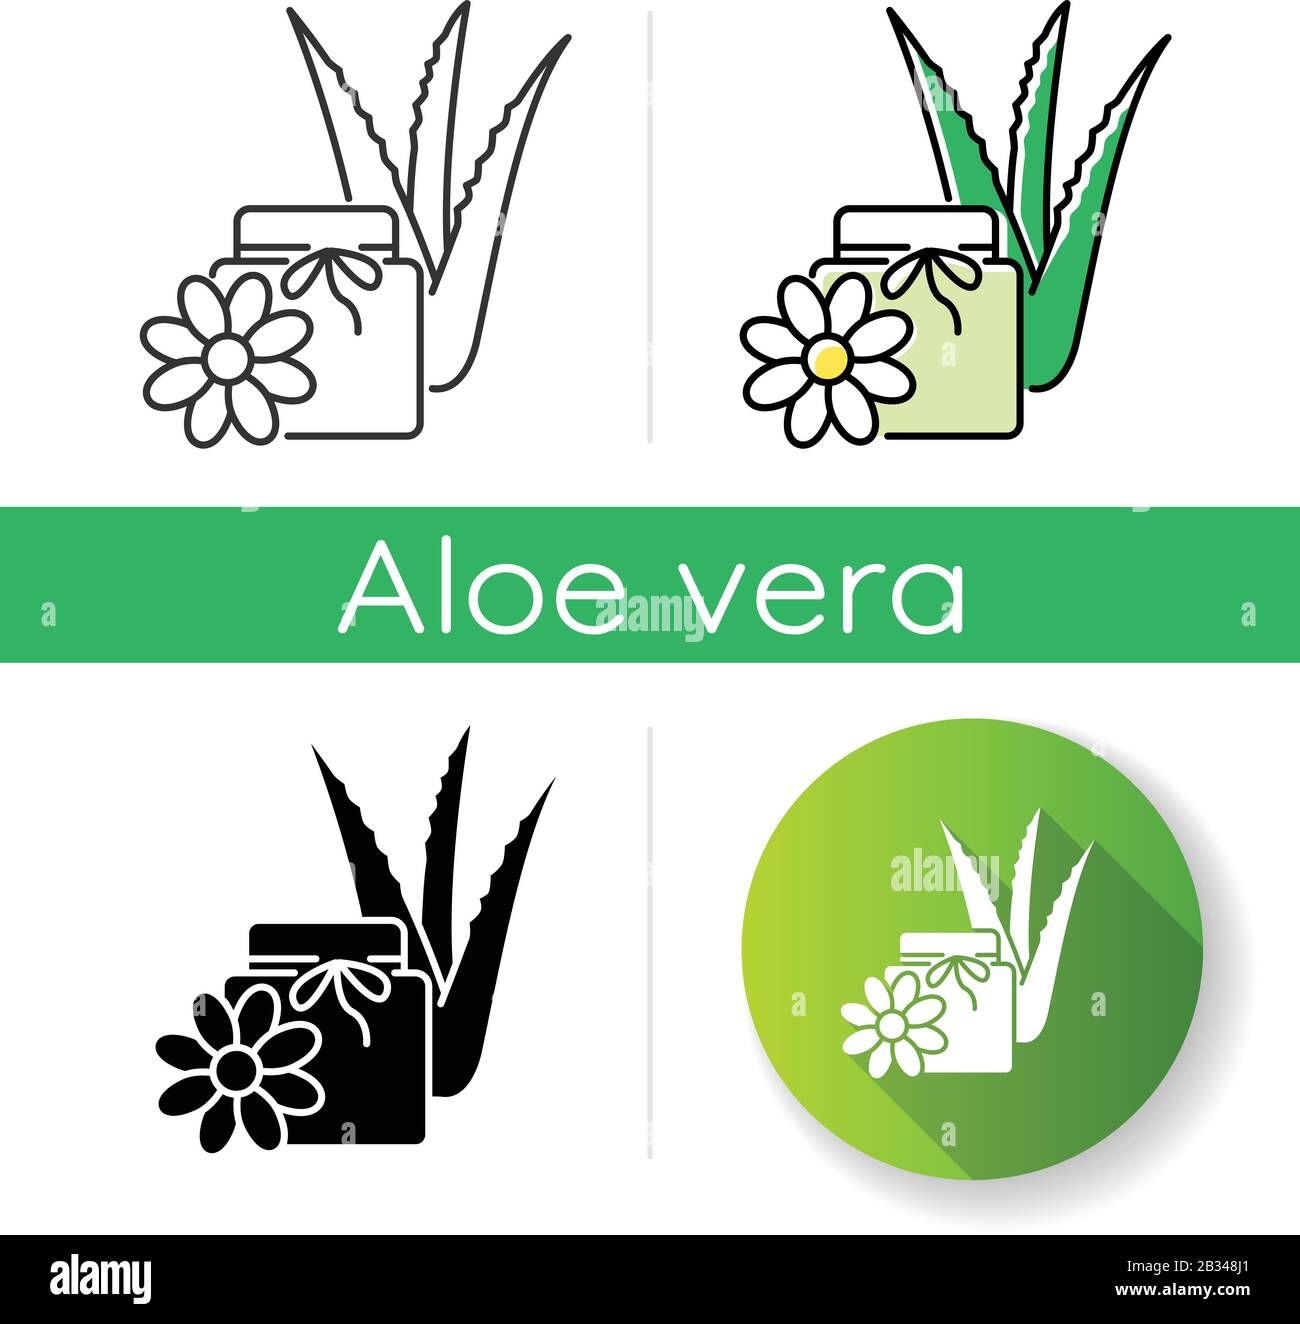 Vegan wax icon. Cream with floral extract. Organic lotion in jar with aloe vera. Medicinal herbs product. Plant based cosmetic. Linear black and RGB Stock Vector